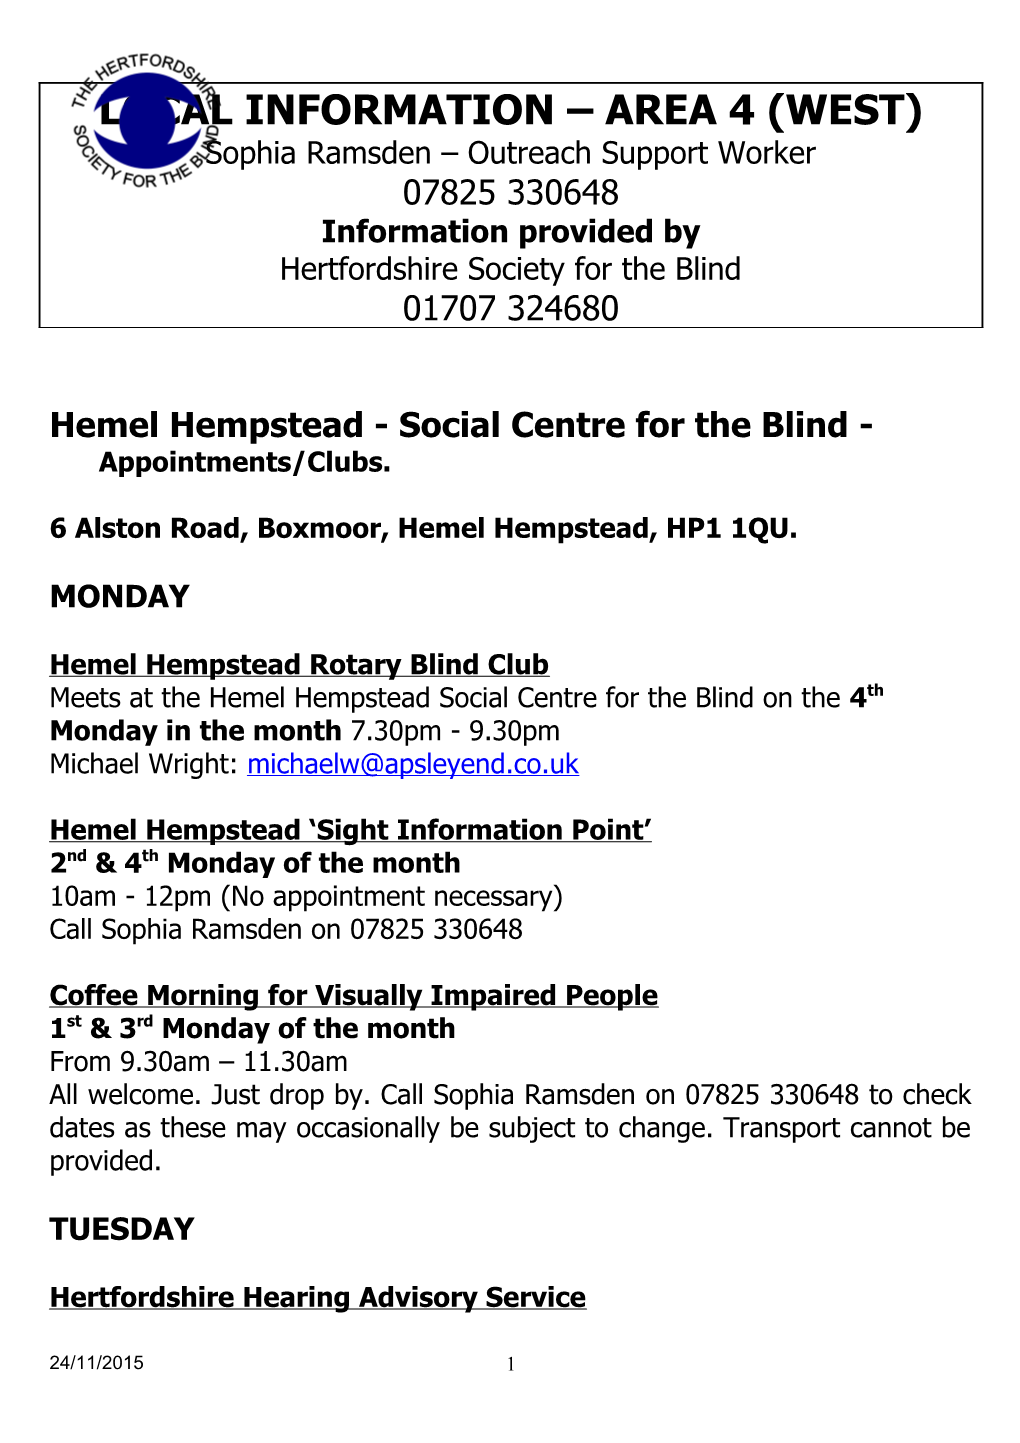 Local Information - North West Herts. Area